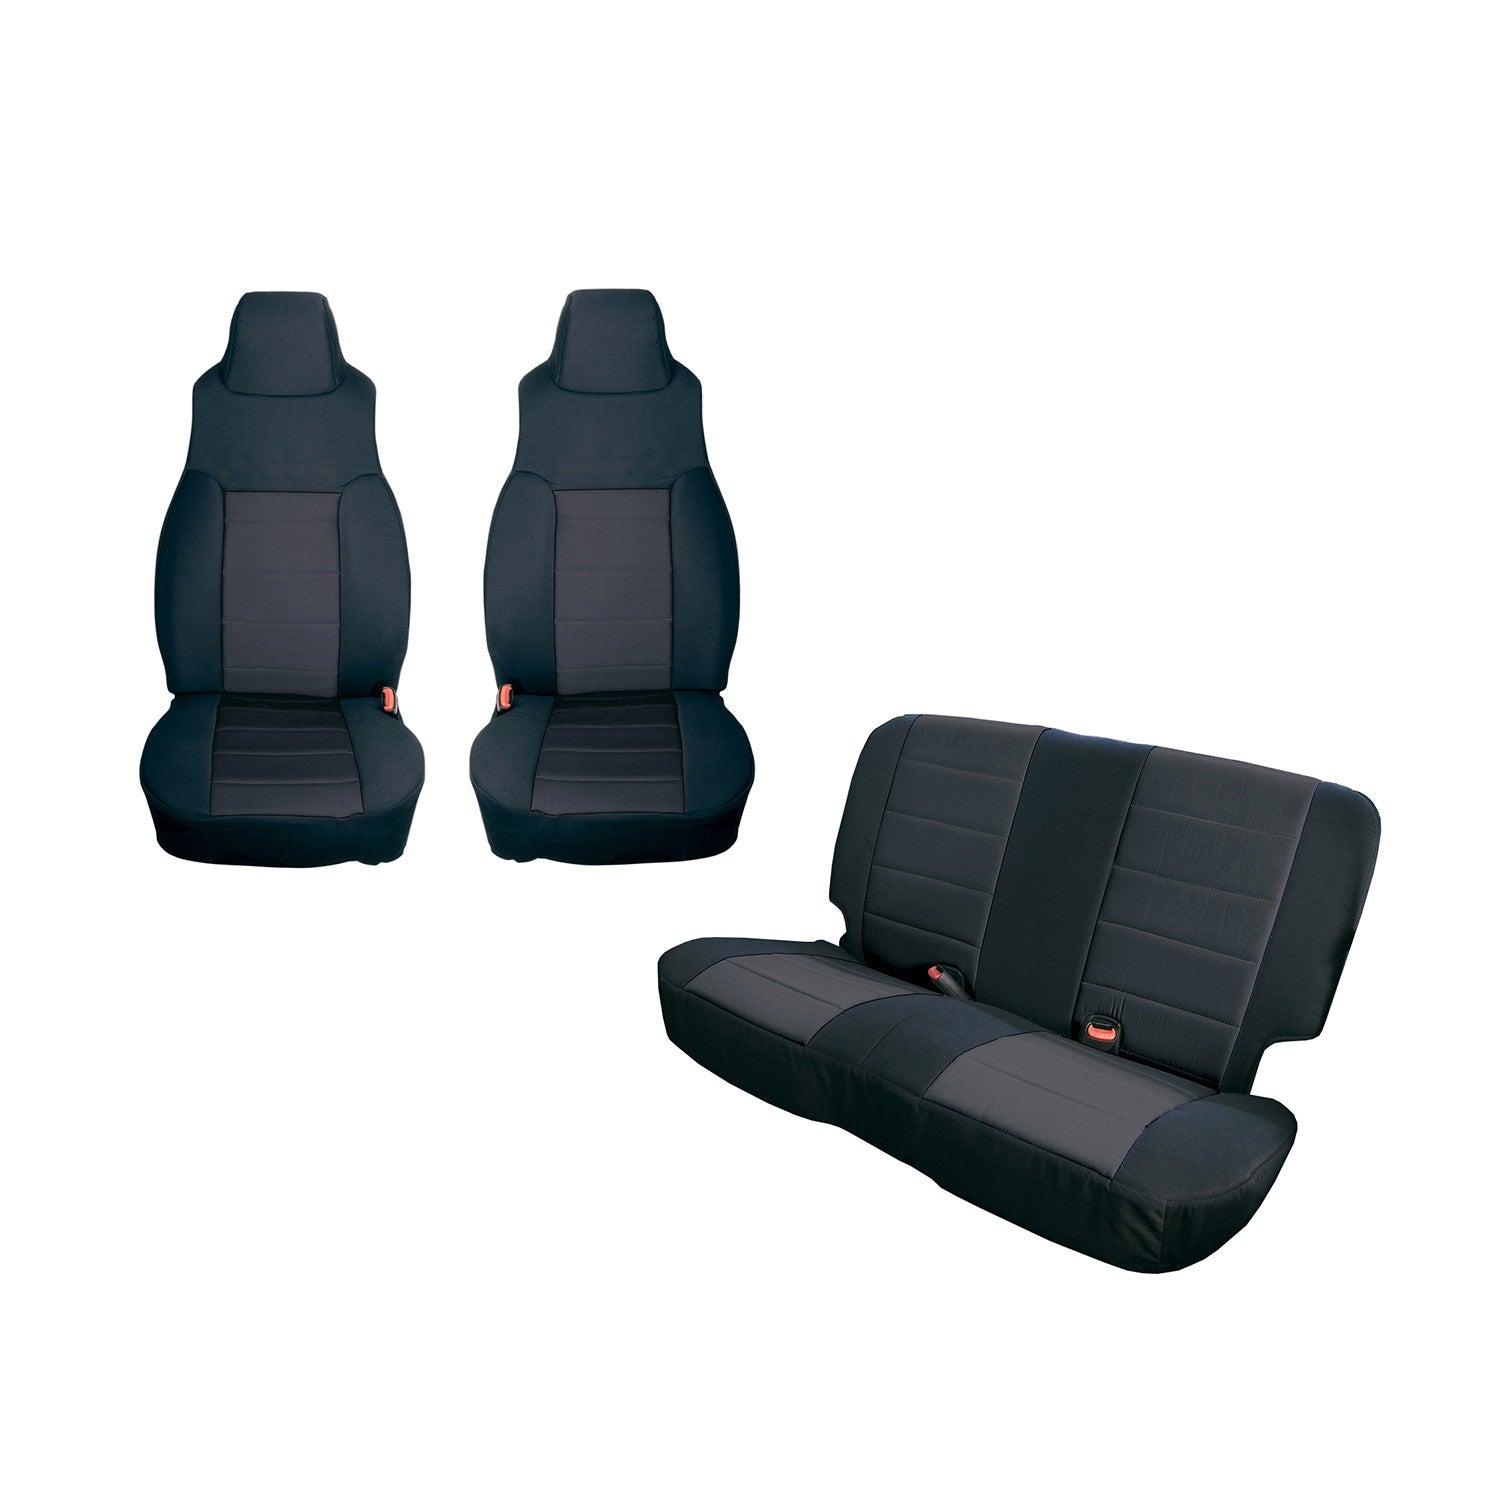 Rugged Ridge  Seat Cover Kit Black/Gray Fits 2003-2006 Jeep Wr –  PVE OffRoad